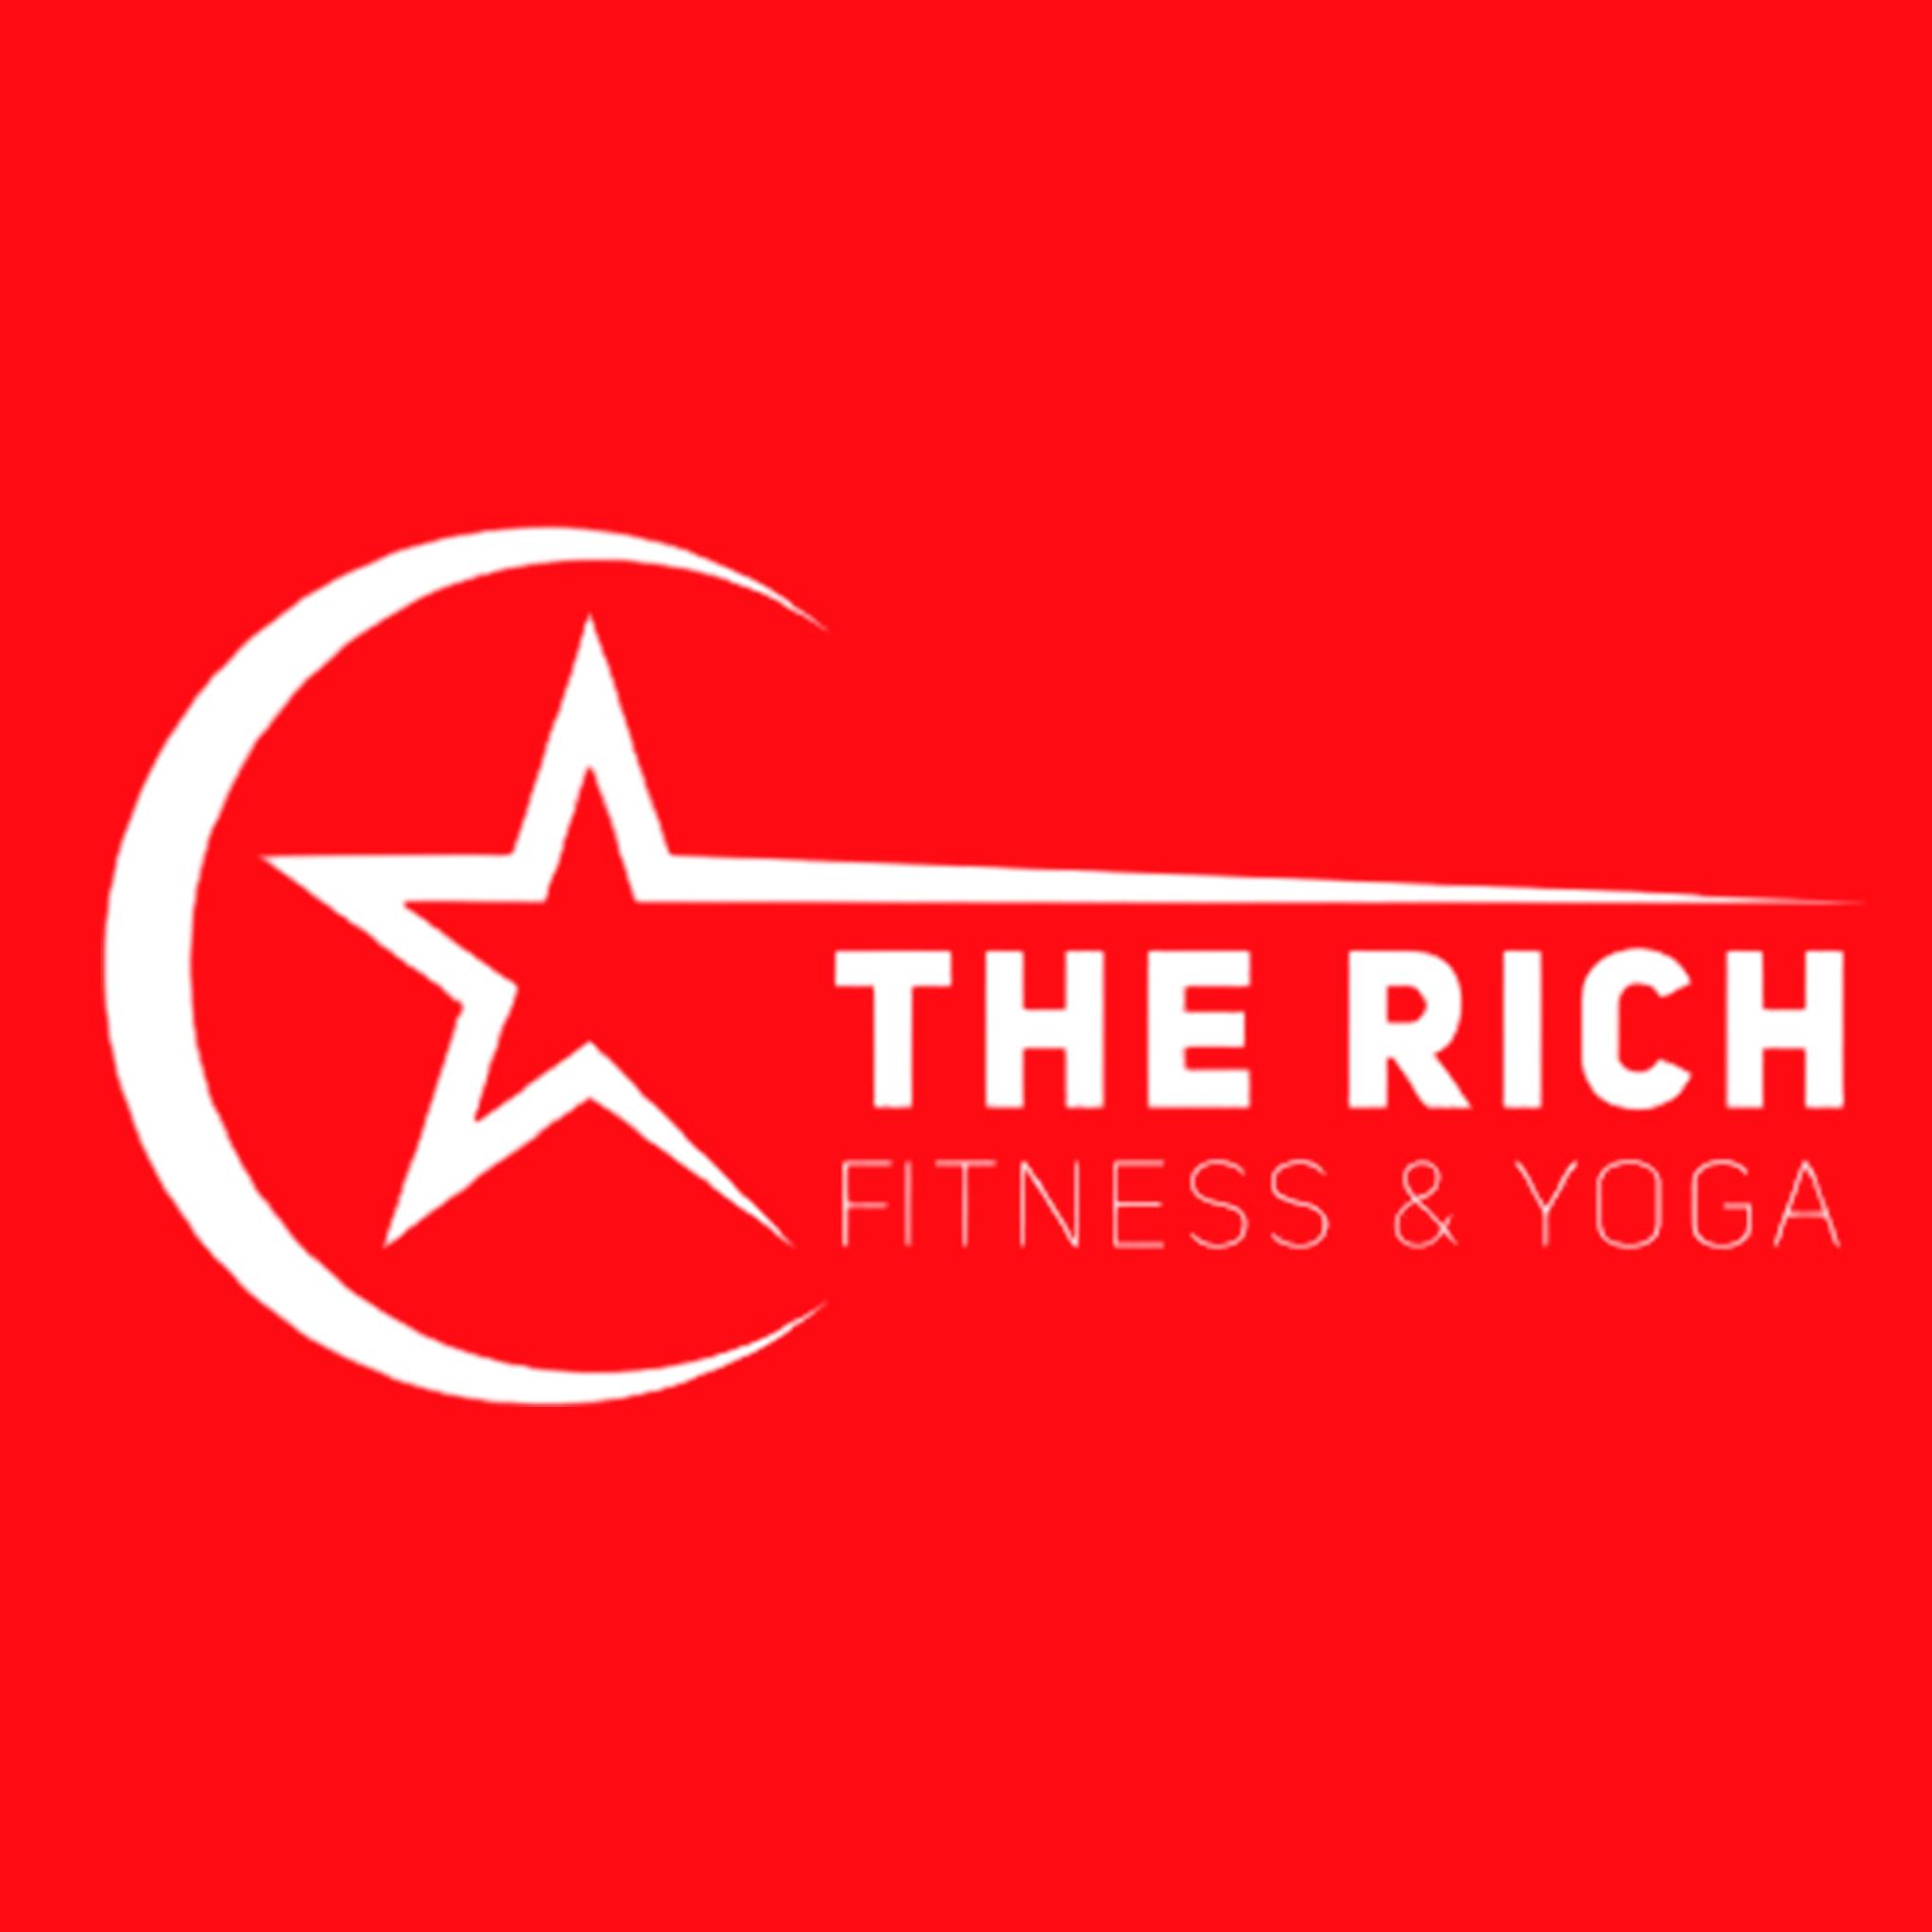 The Rich Fitness & Yoga